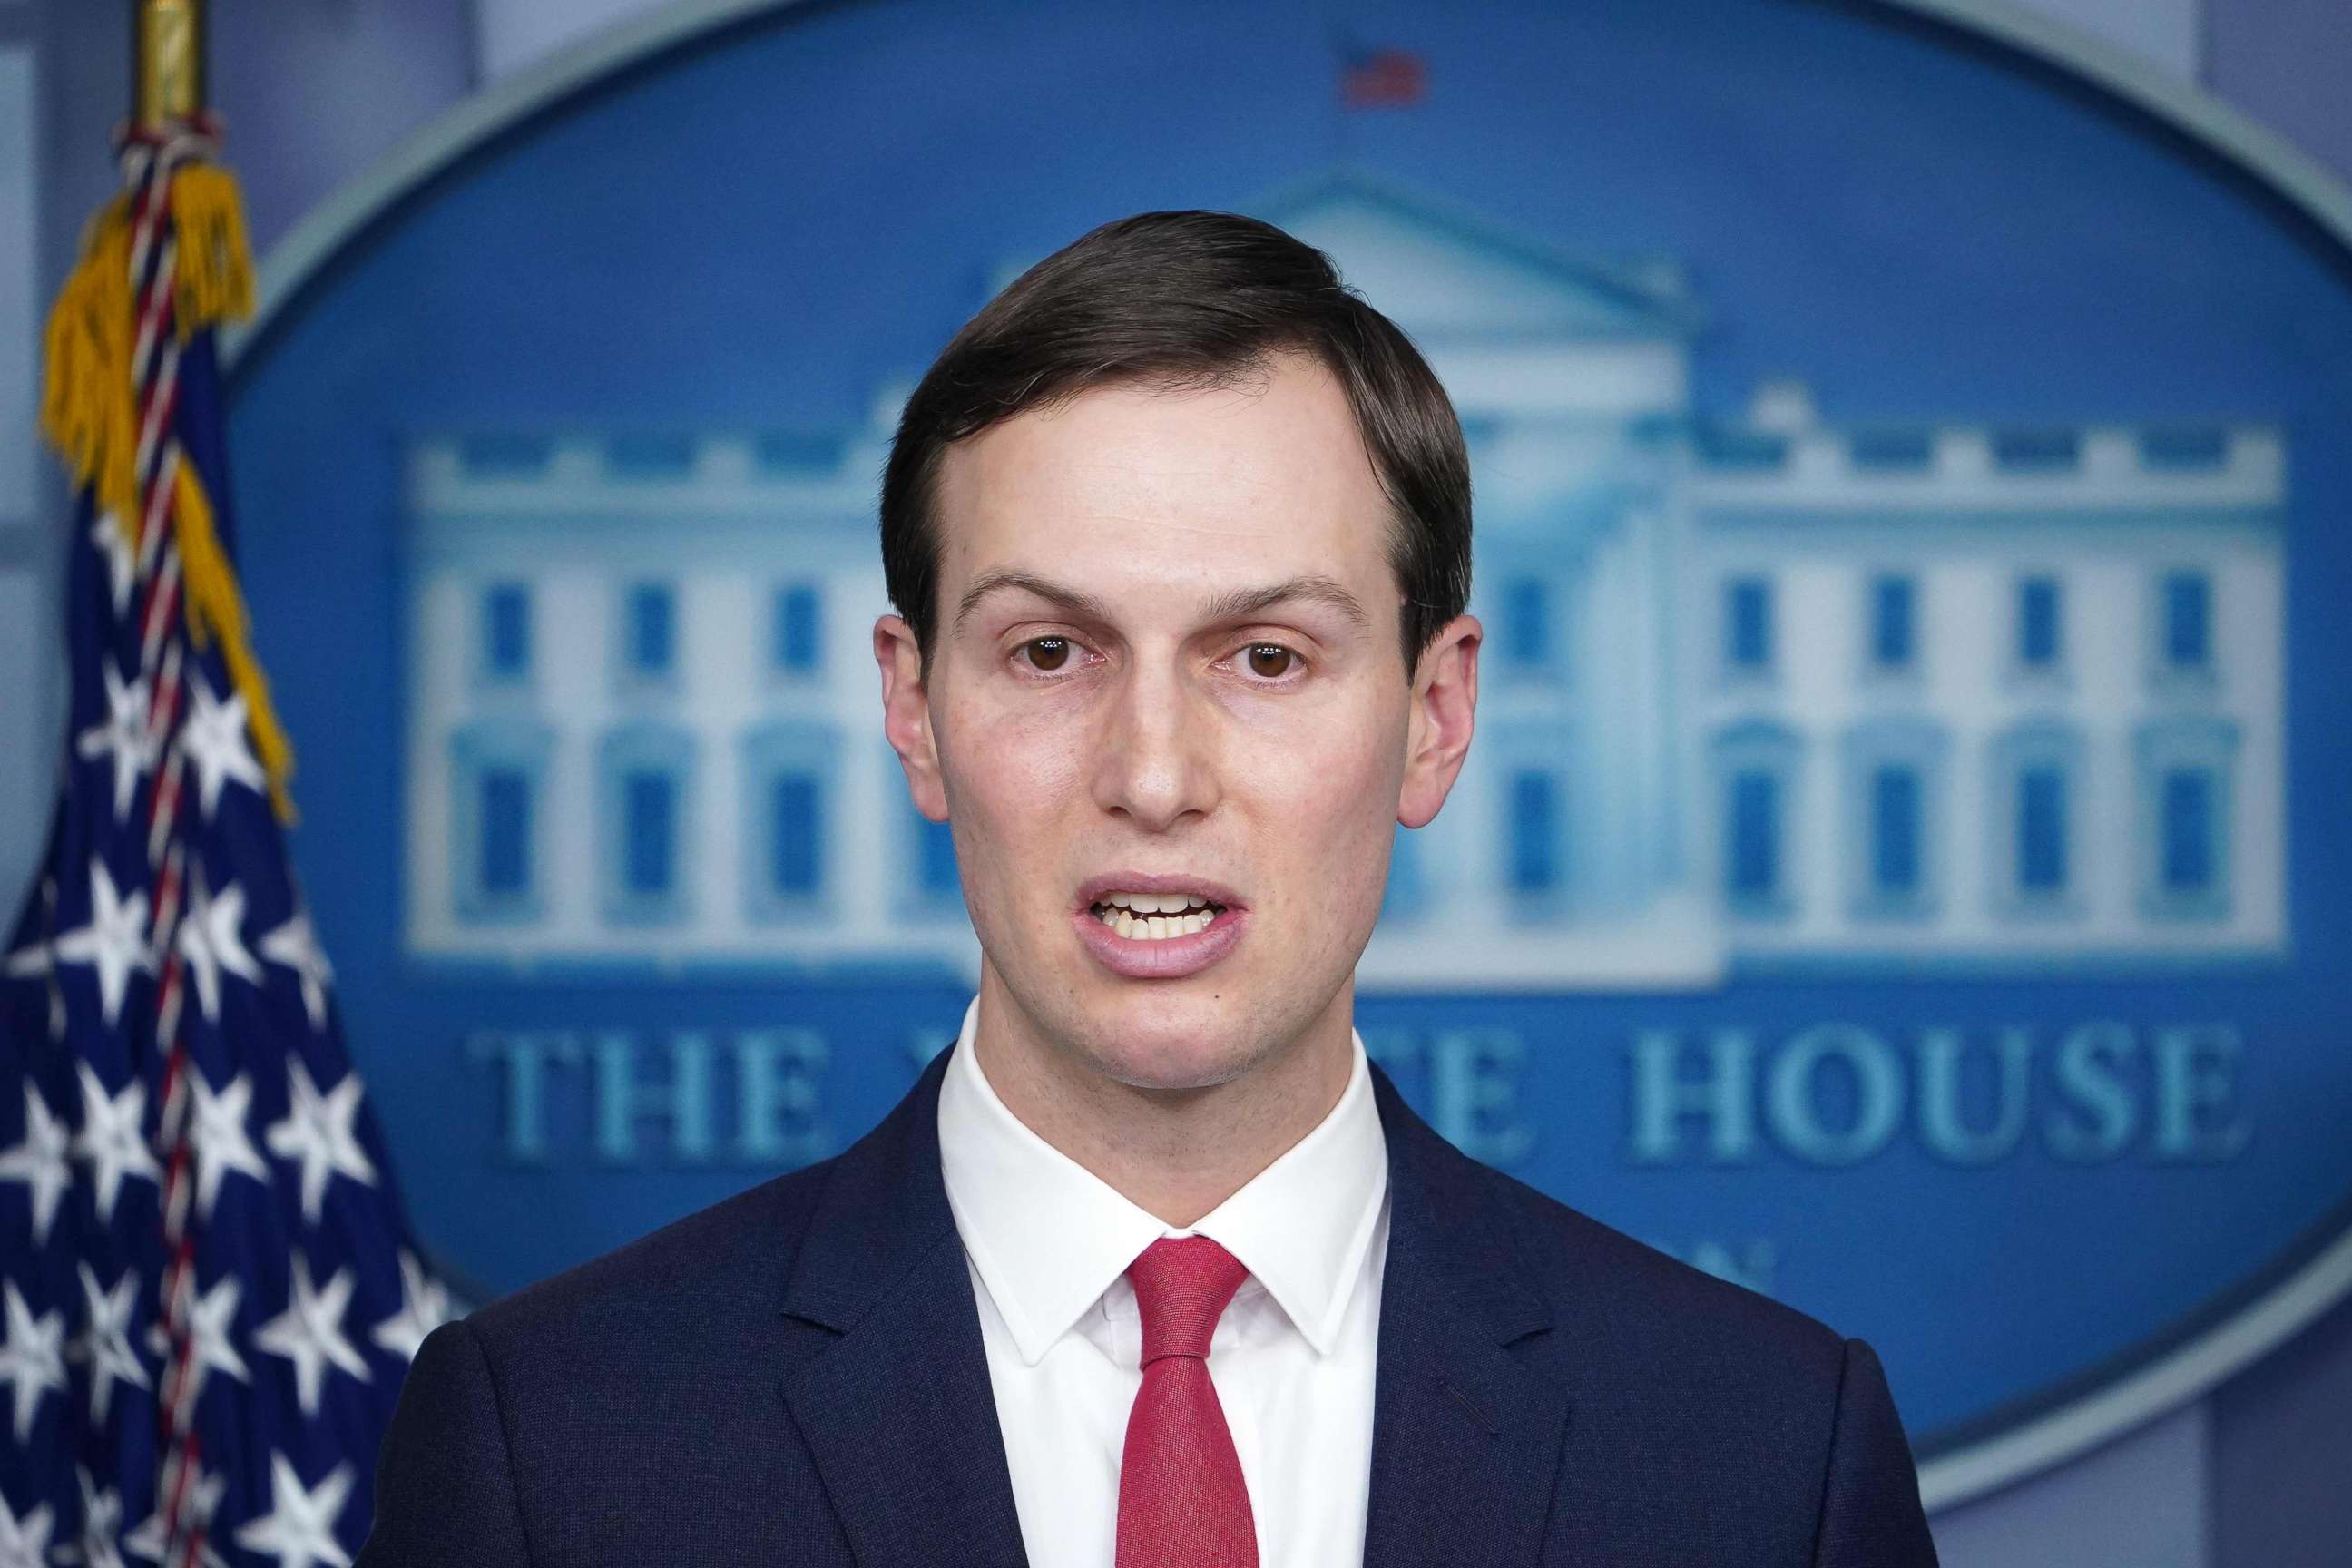 PHOTO: Senior Advisor to the President Jared Kushner speaks during the daily briefing on the novel coronavirus, COVID-19, in the Brady Briefing Room at the White House on April 2, 2020, in Washington.